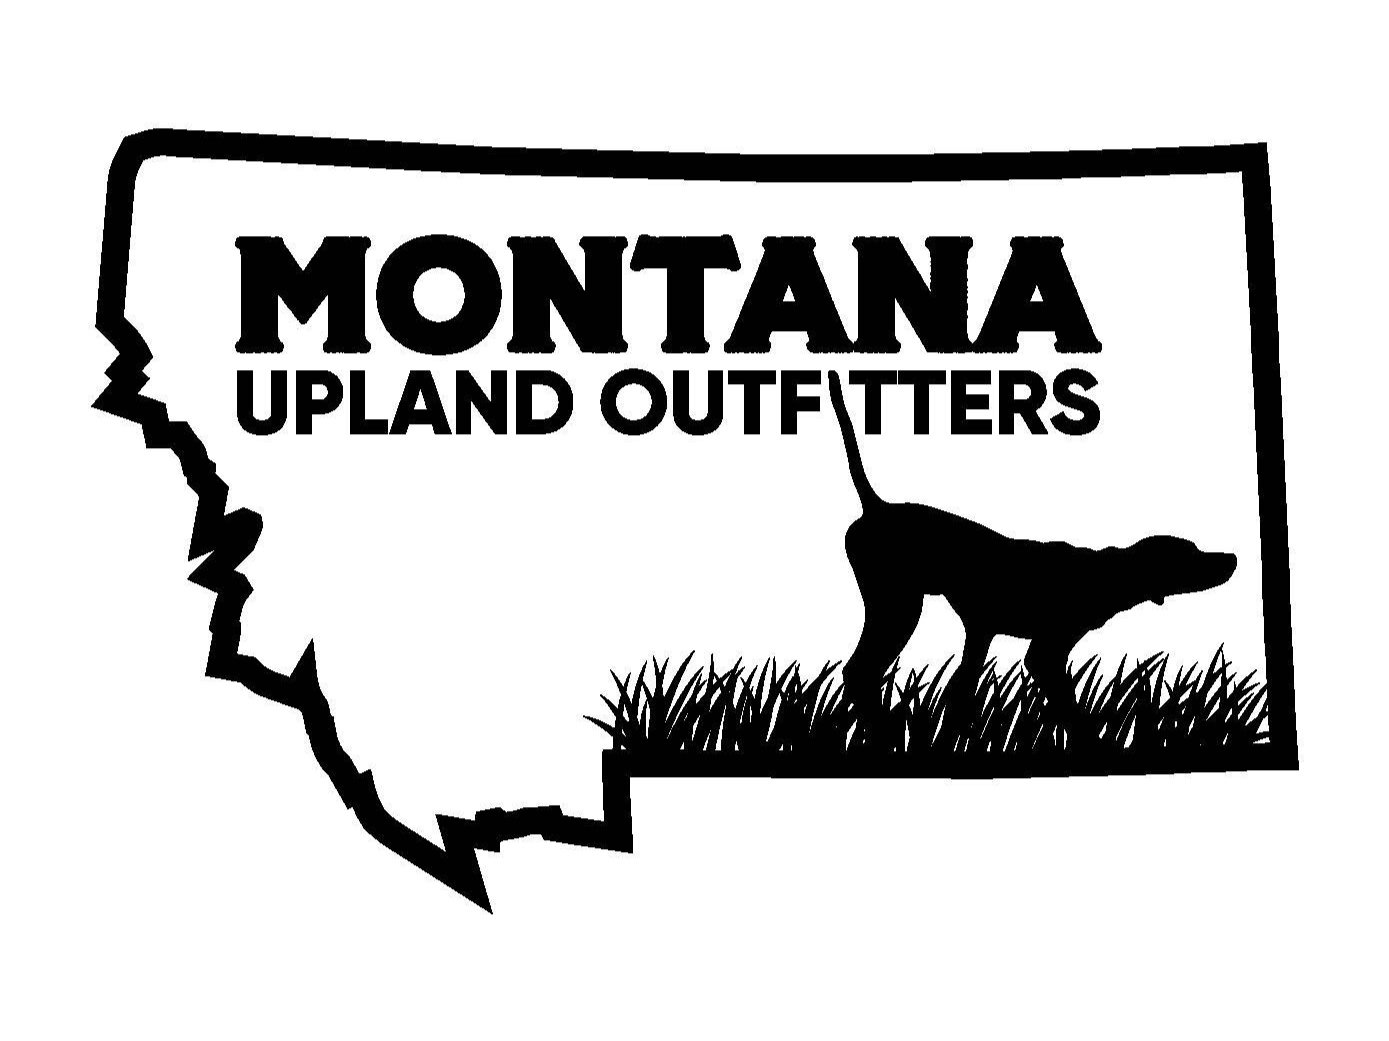 Montana Upland Outfitters